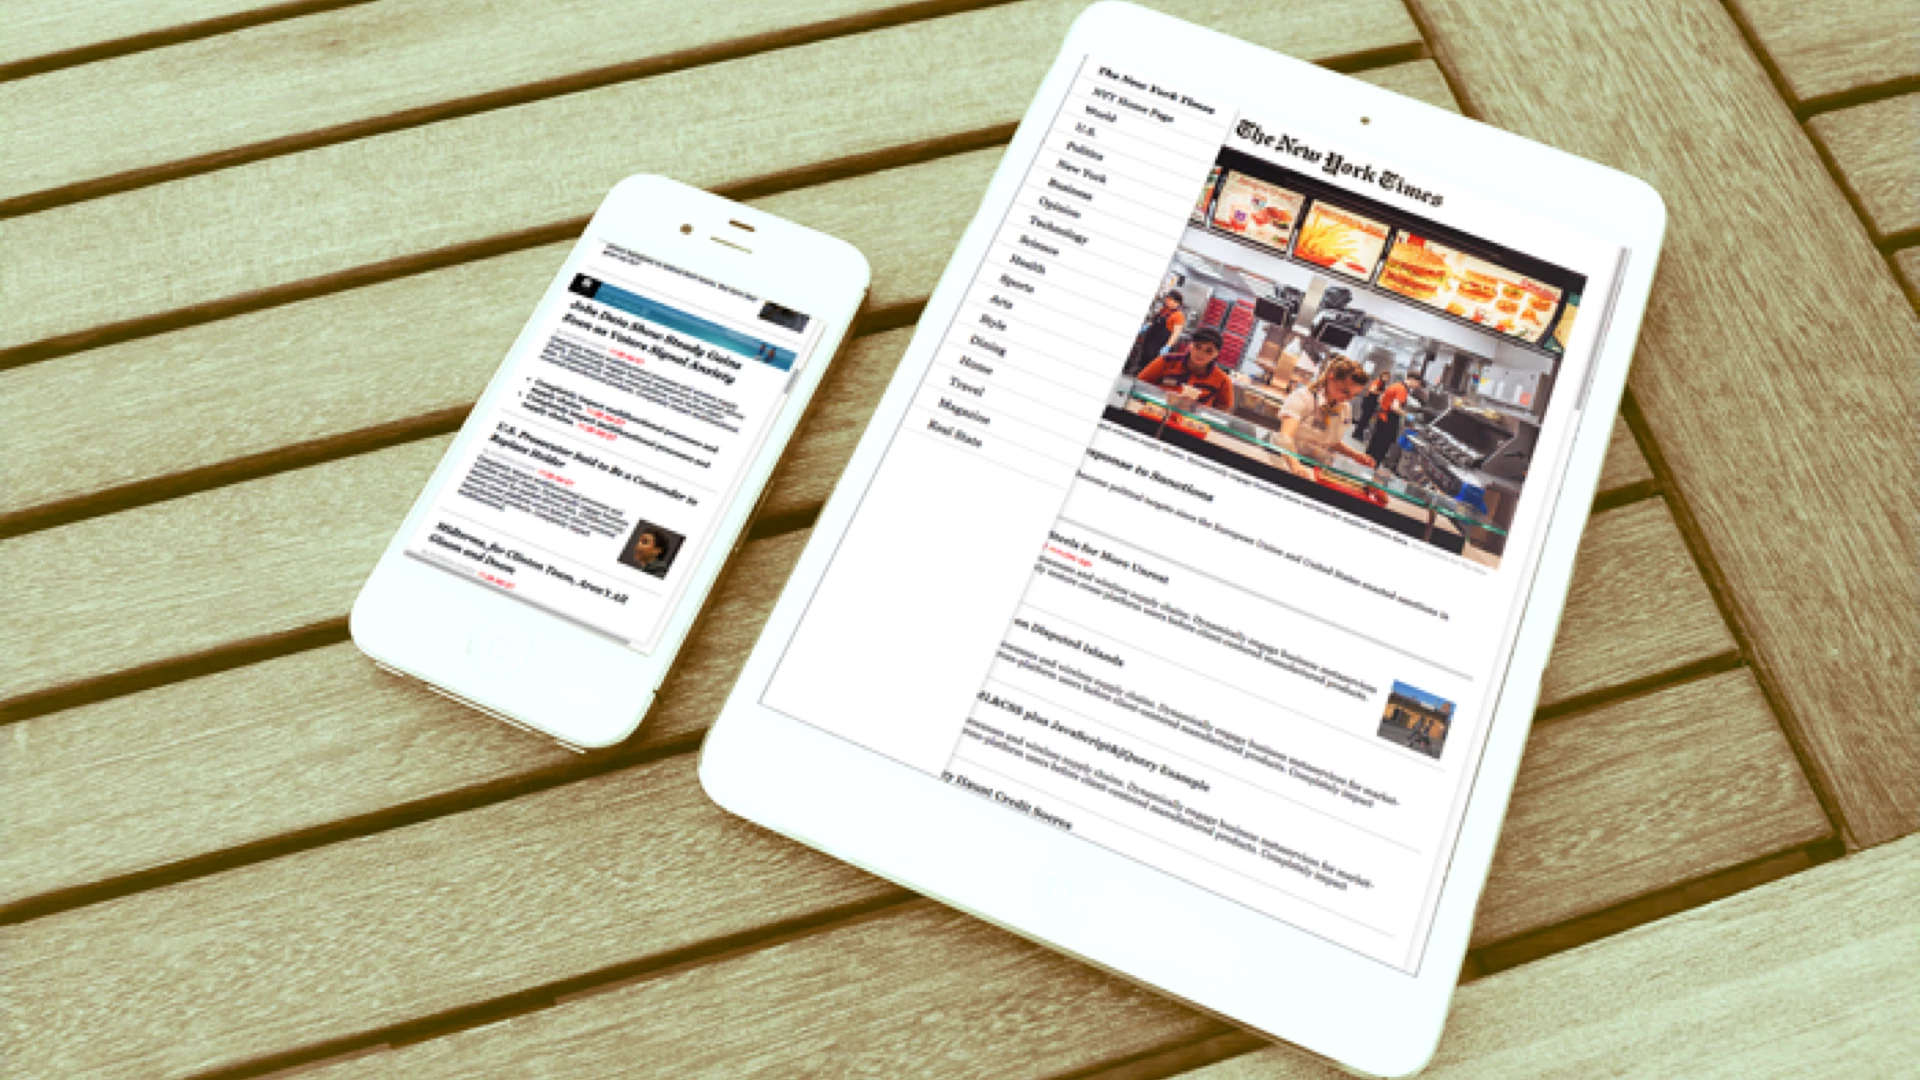 Image of two devices, tablet and phone, showing The New York Times edition